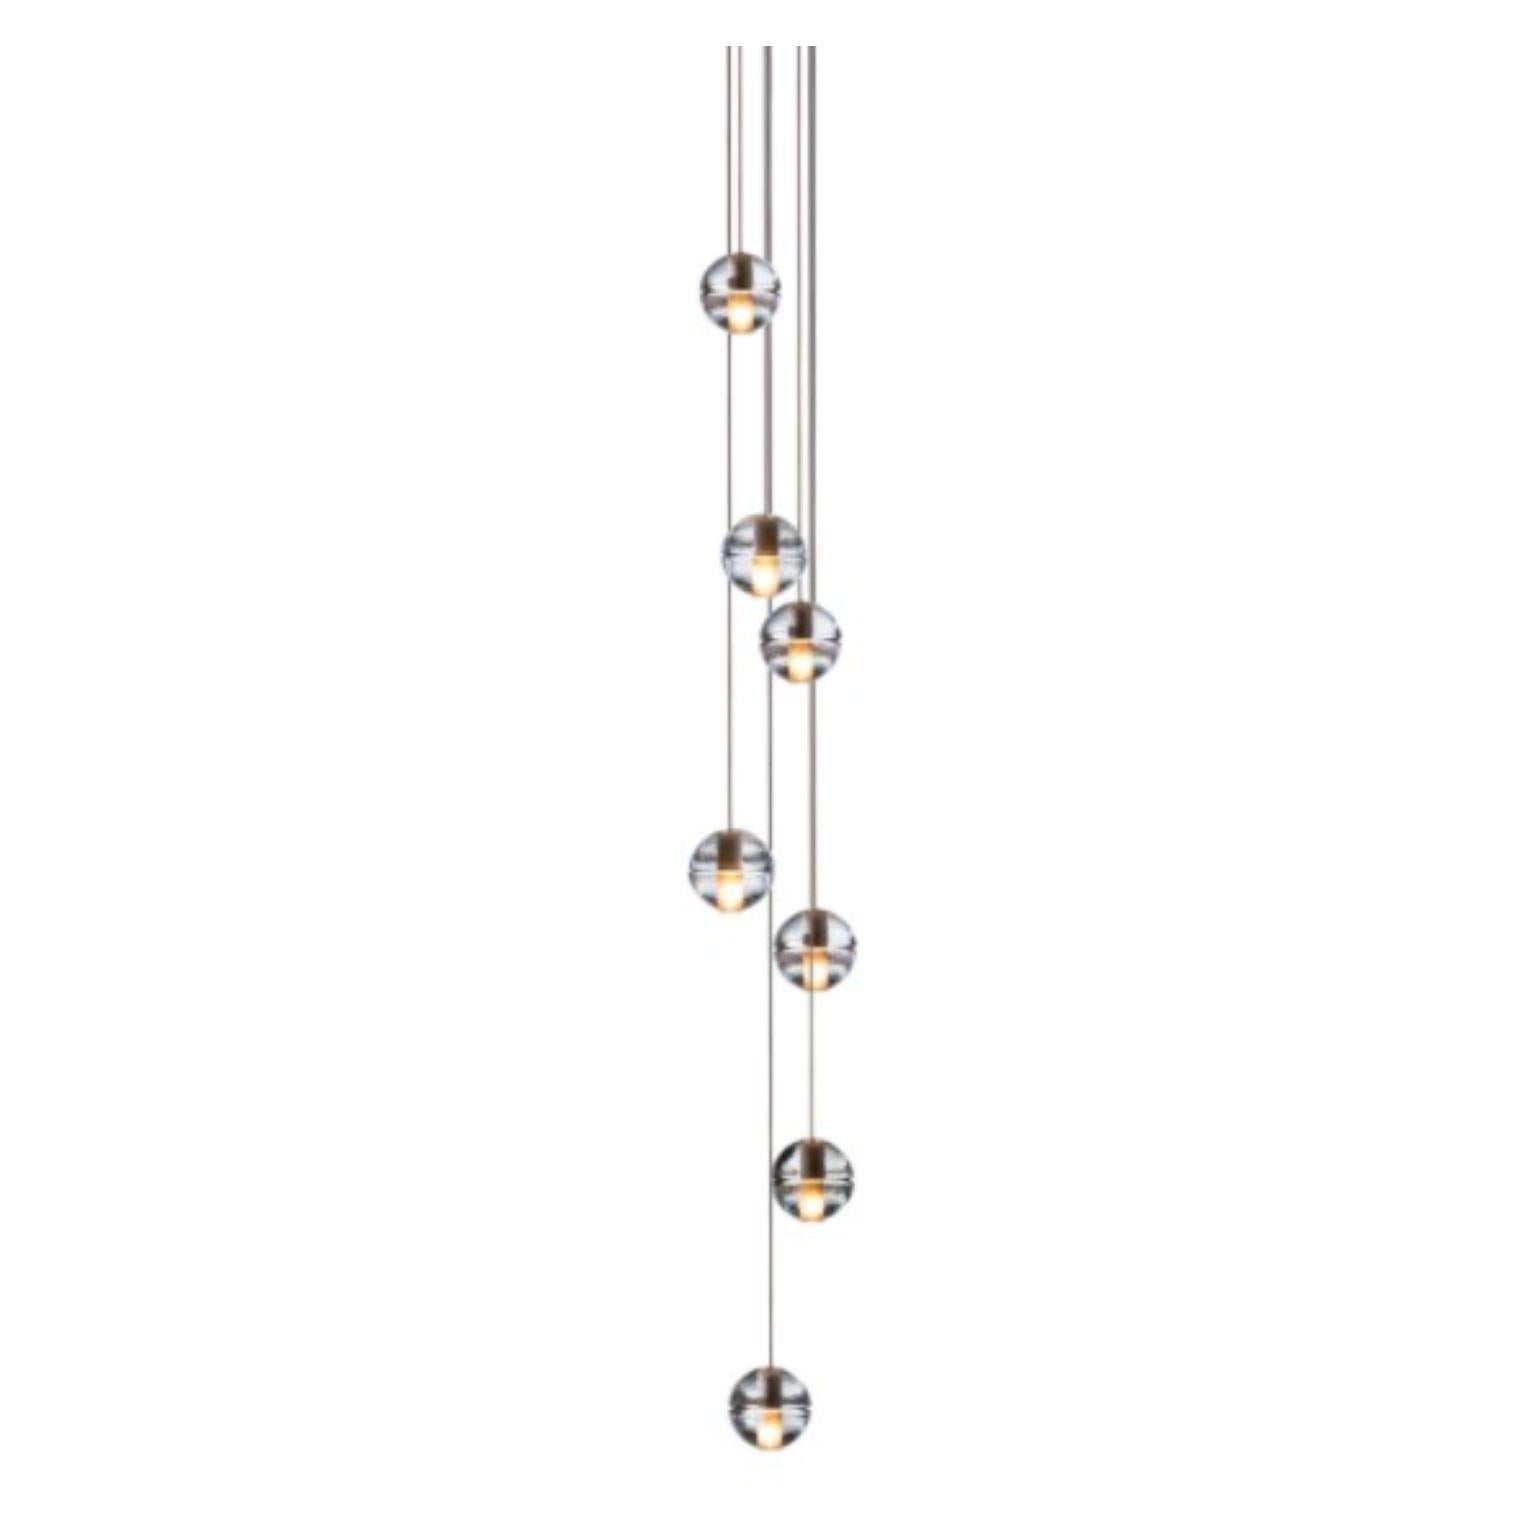 14.7 single pendant by Bocci
Dimensions: D 20.3 x H 300 cm
Materials: Brushed nickel
Weight: 14 kg
Adjustable lengths, Other materials and dimensions can be ordered.

All our lamps can be wired according to each country. If sold to the USA it